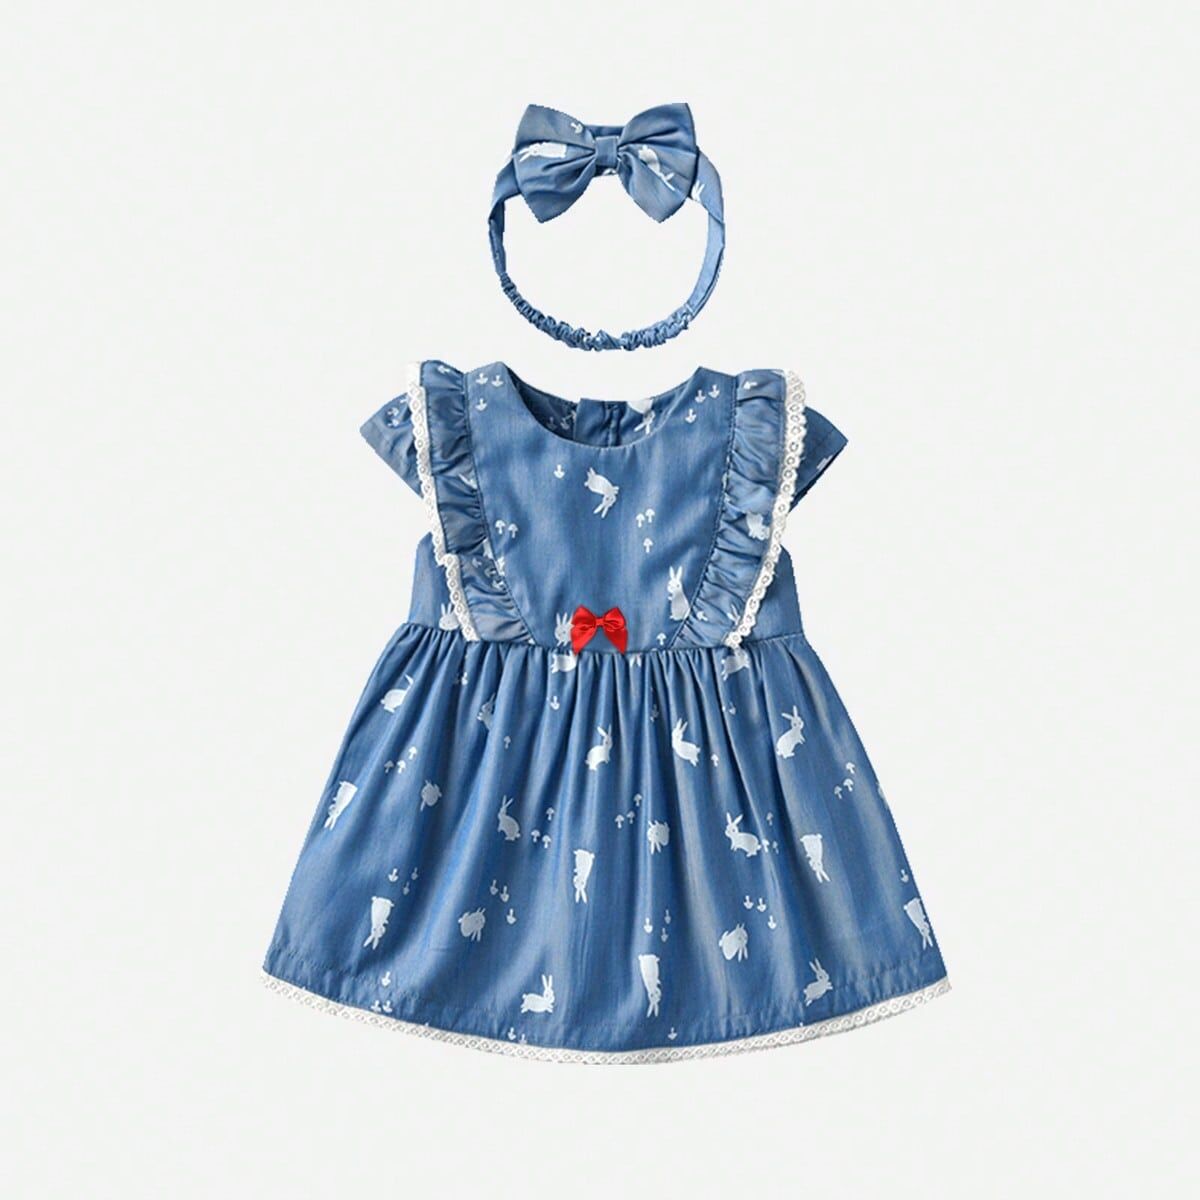 SHEIN Pretty And Delicate Bunny Print Dress And The Same Color Headband For Baby Girls Blue 2Y,3Y,9-12M,12-18M,18-24M Girls